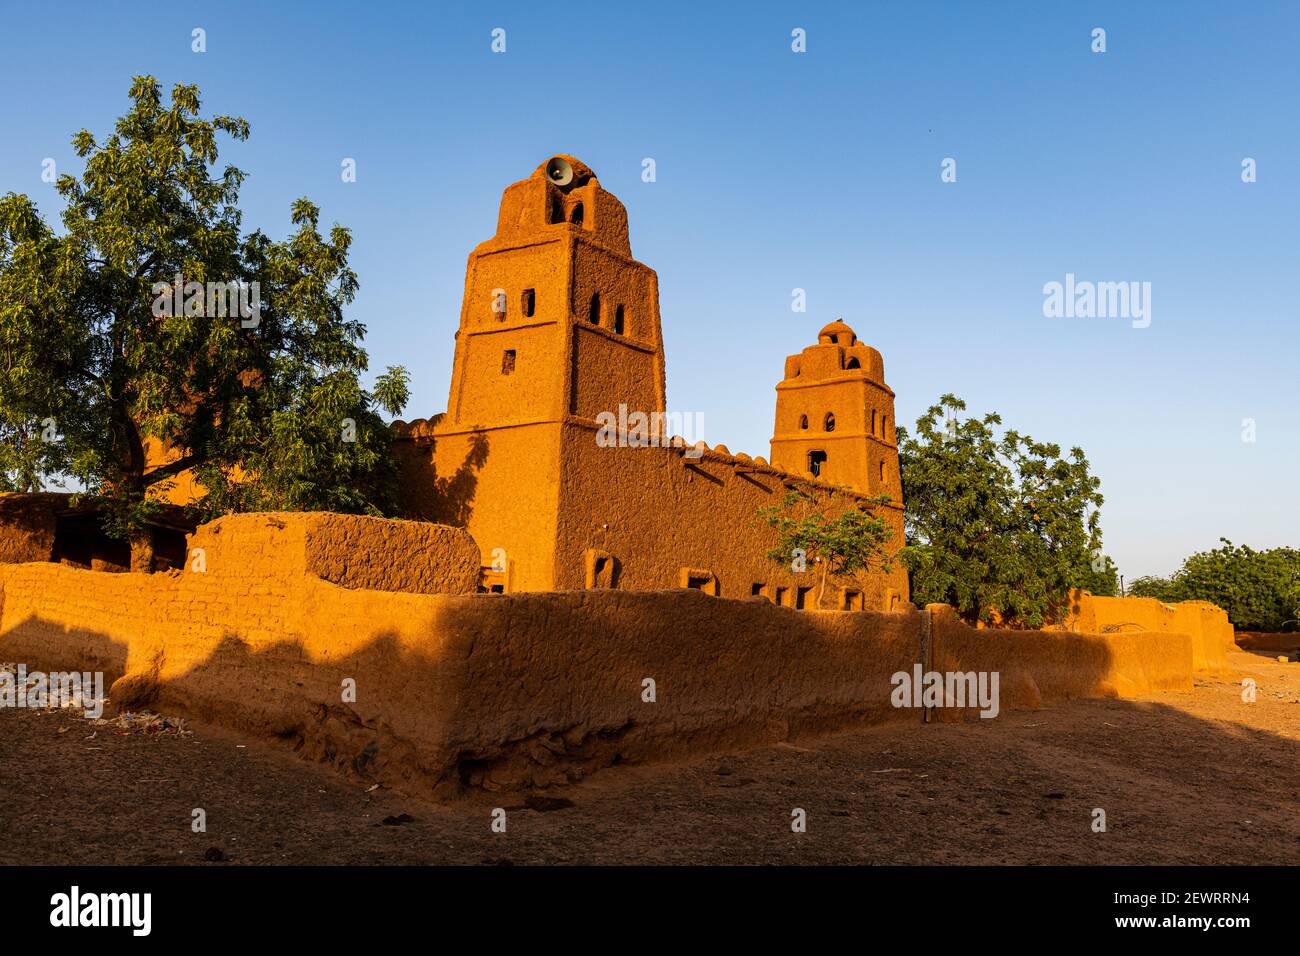 Sudano-Sahelian architectural style mosque in Yamma, Sahel, Niger, Africa Stock Photo